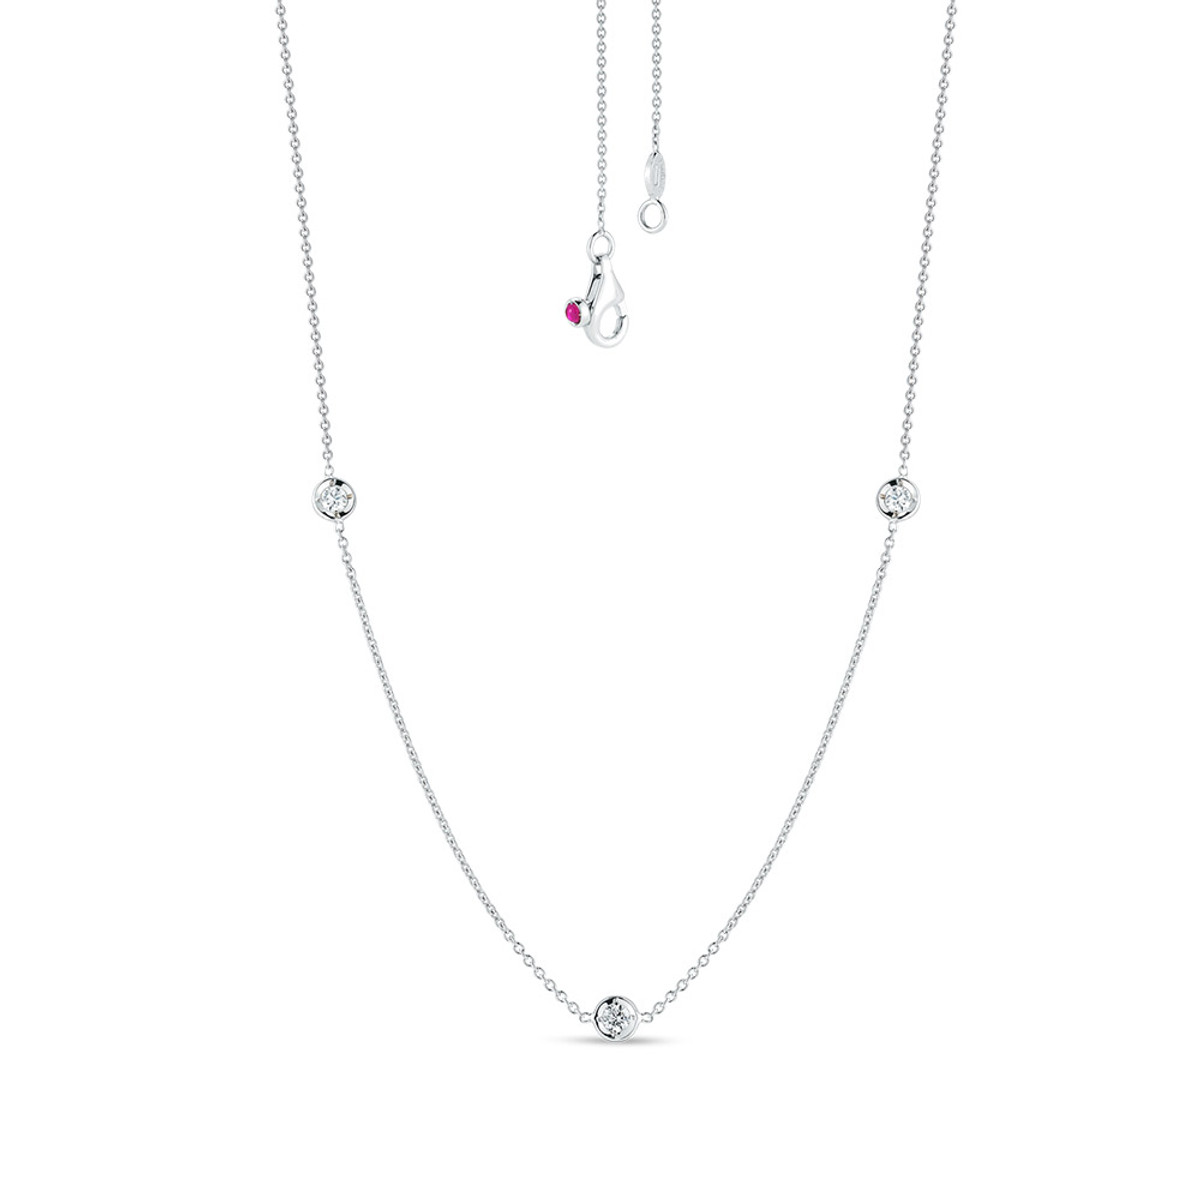 Roberto Coin Diamonds By Inch 18K White Gold & Diamond 3 Station Necklace-DNKFY0964